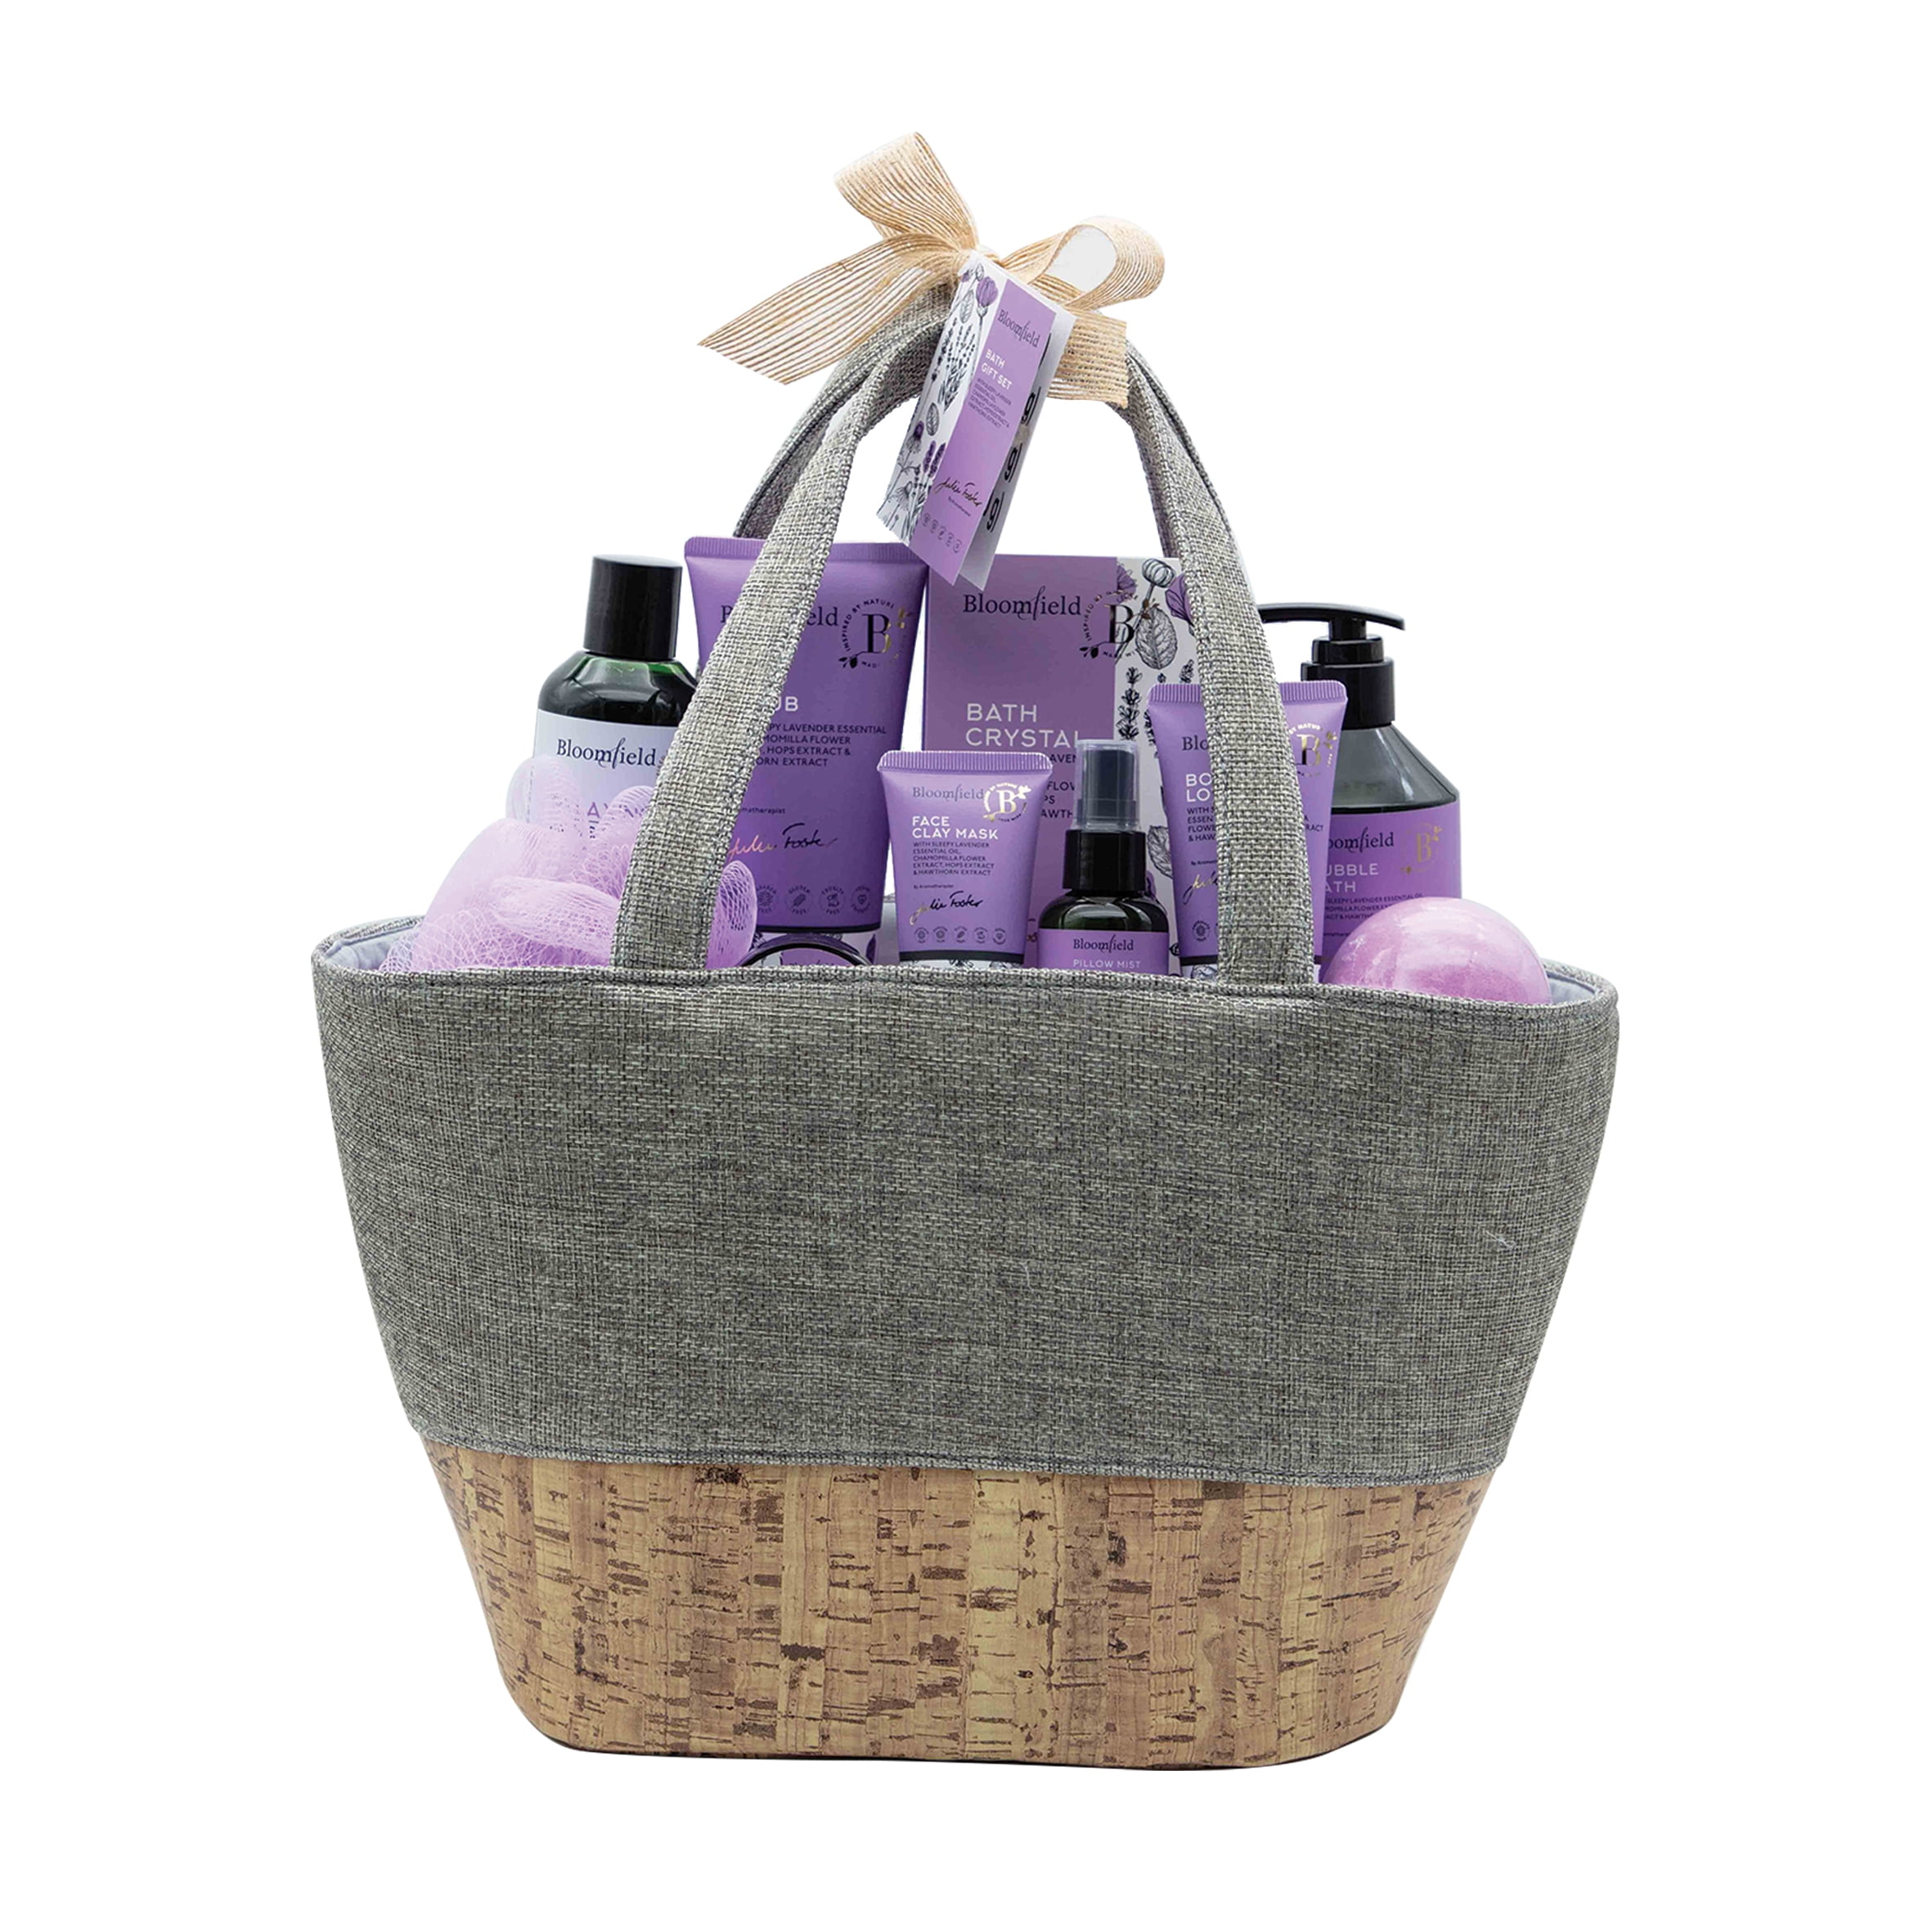 Bloomfield Luxury Lavender Bath Gift Set with Tote Bag, 11 Pieces